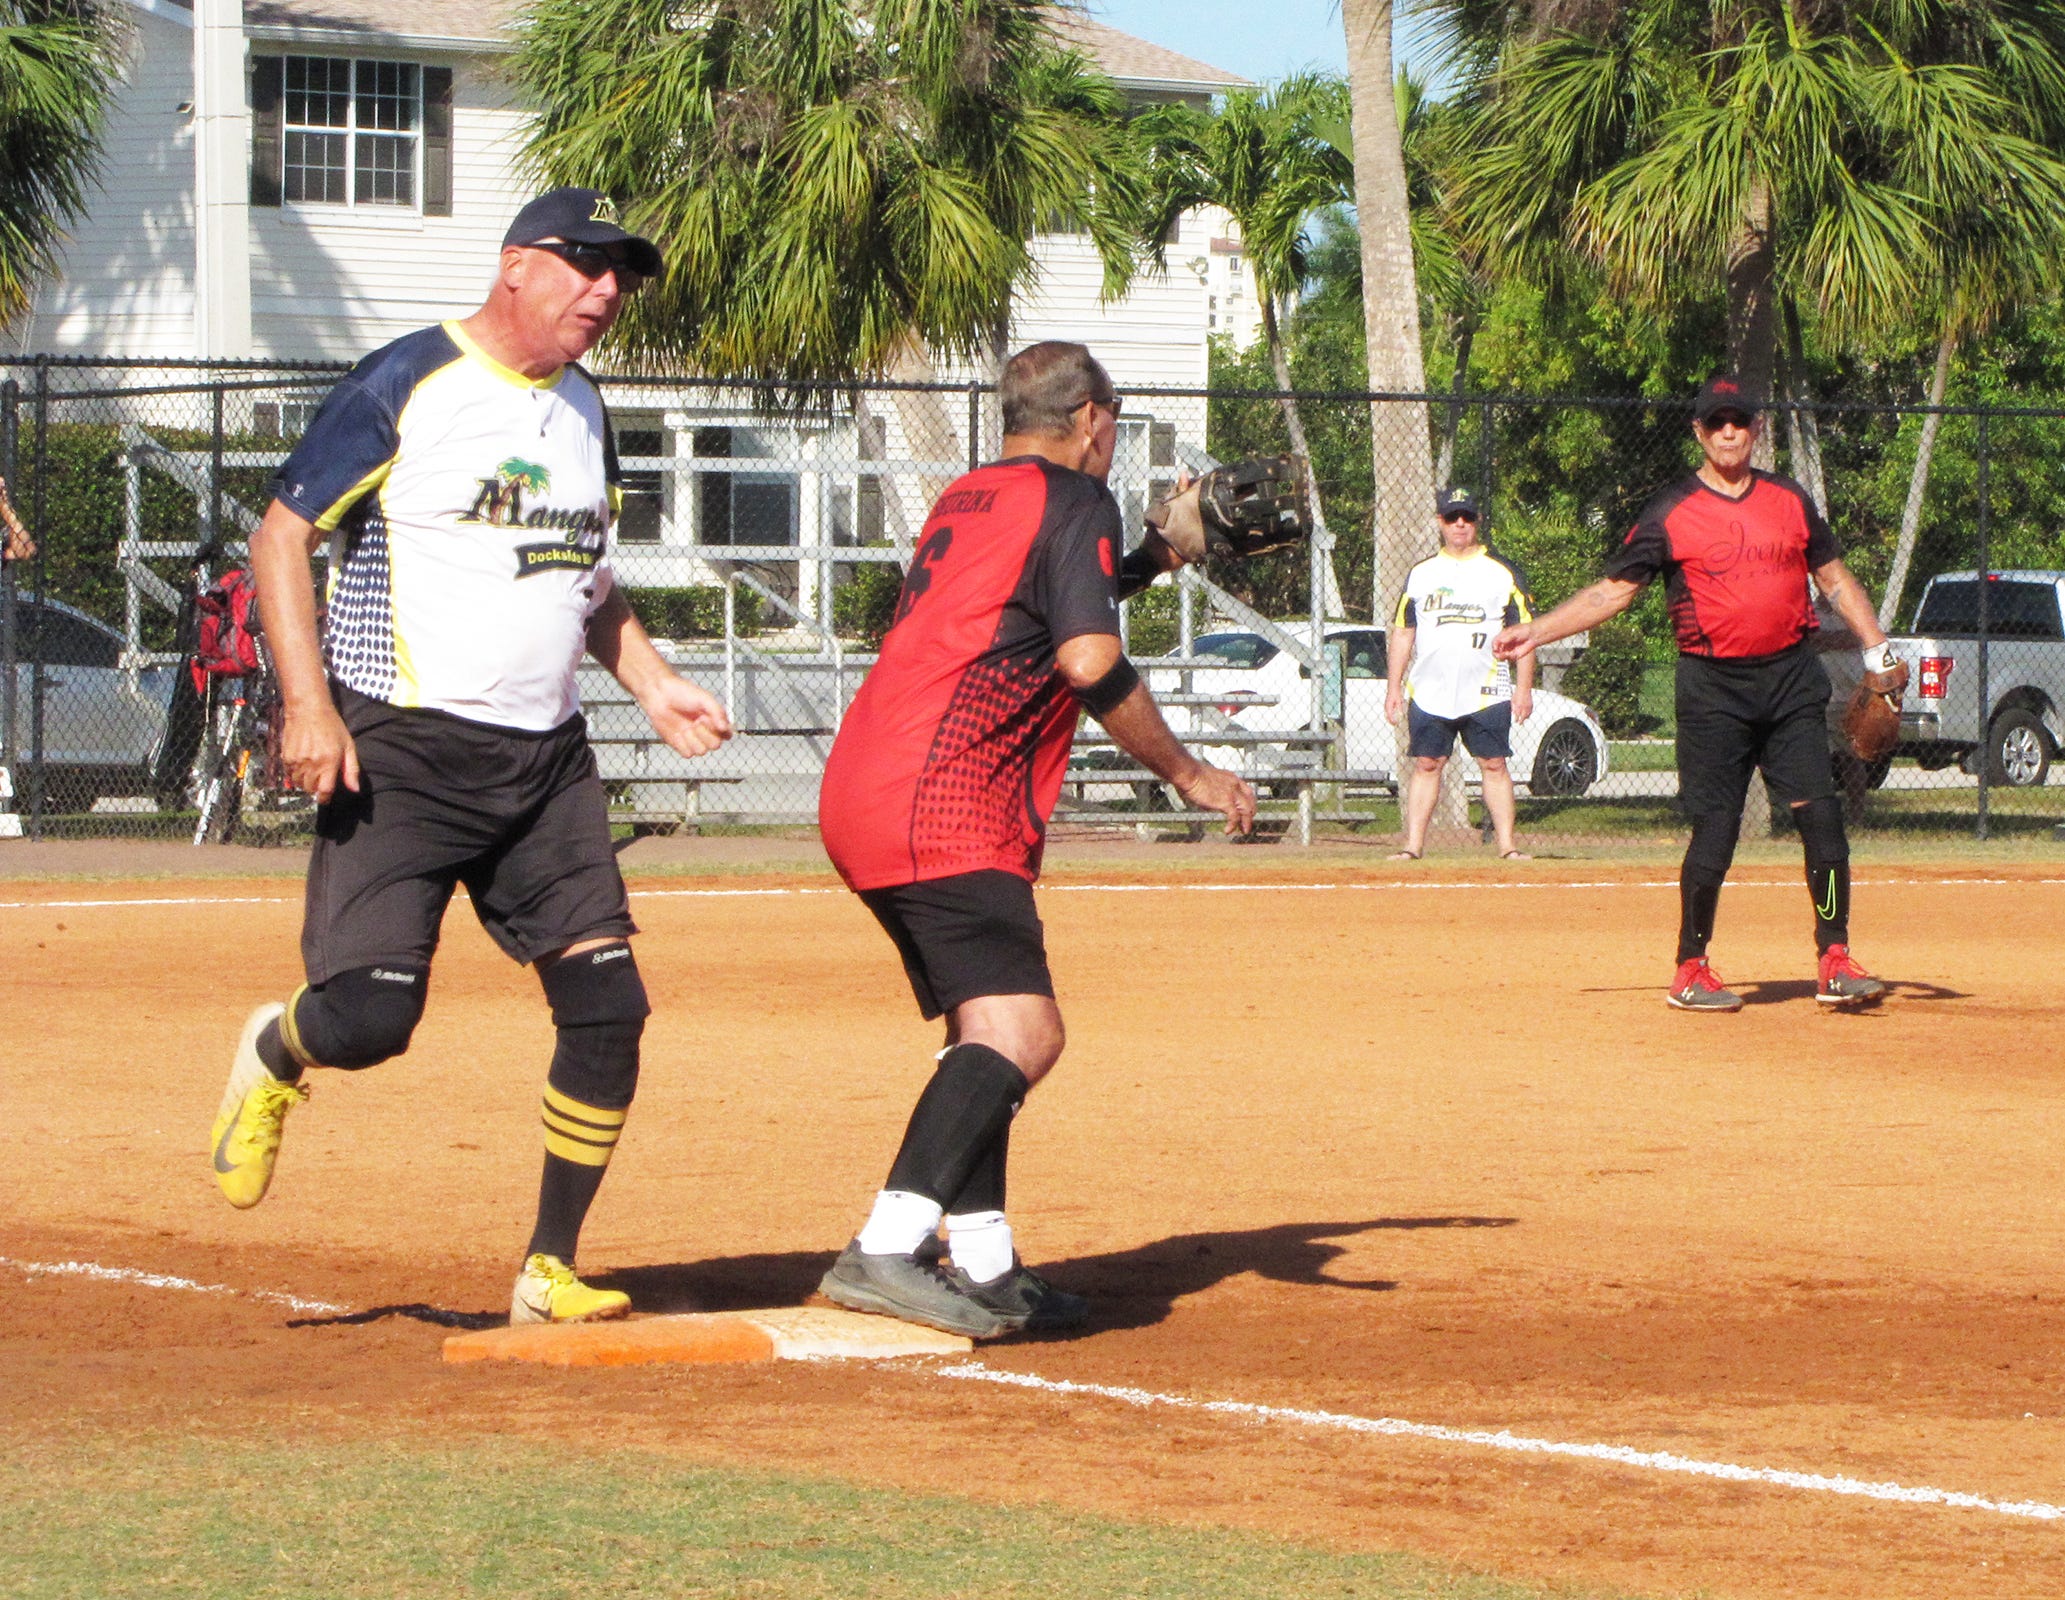 Warren Uhl of Mango’s safely crosses first base as Bill Shurina of Joey’s Pizza awaits the throw.